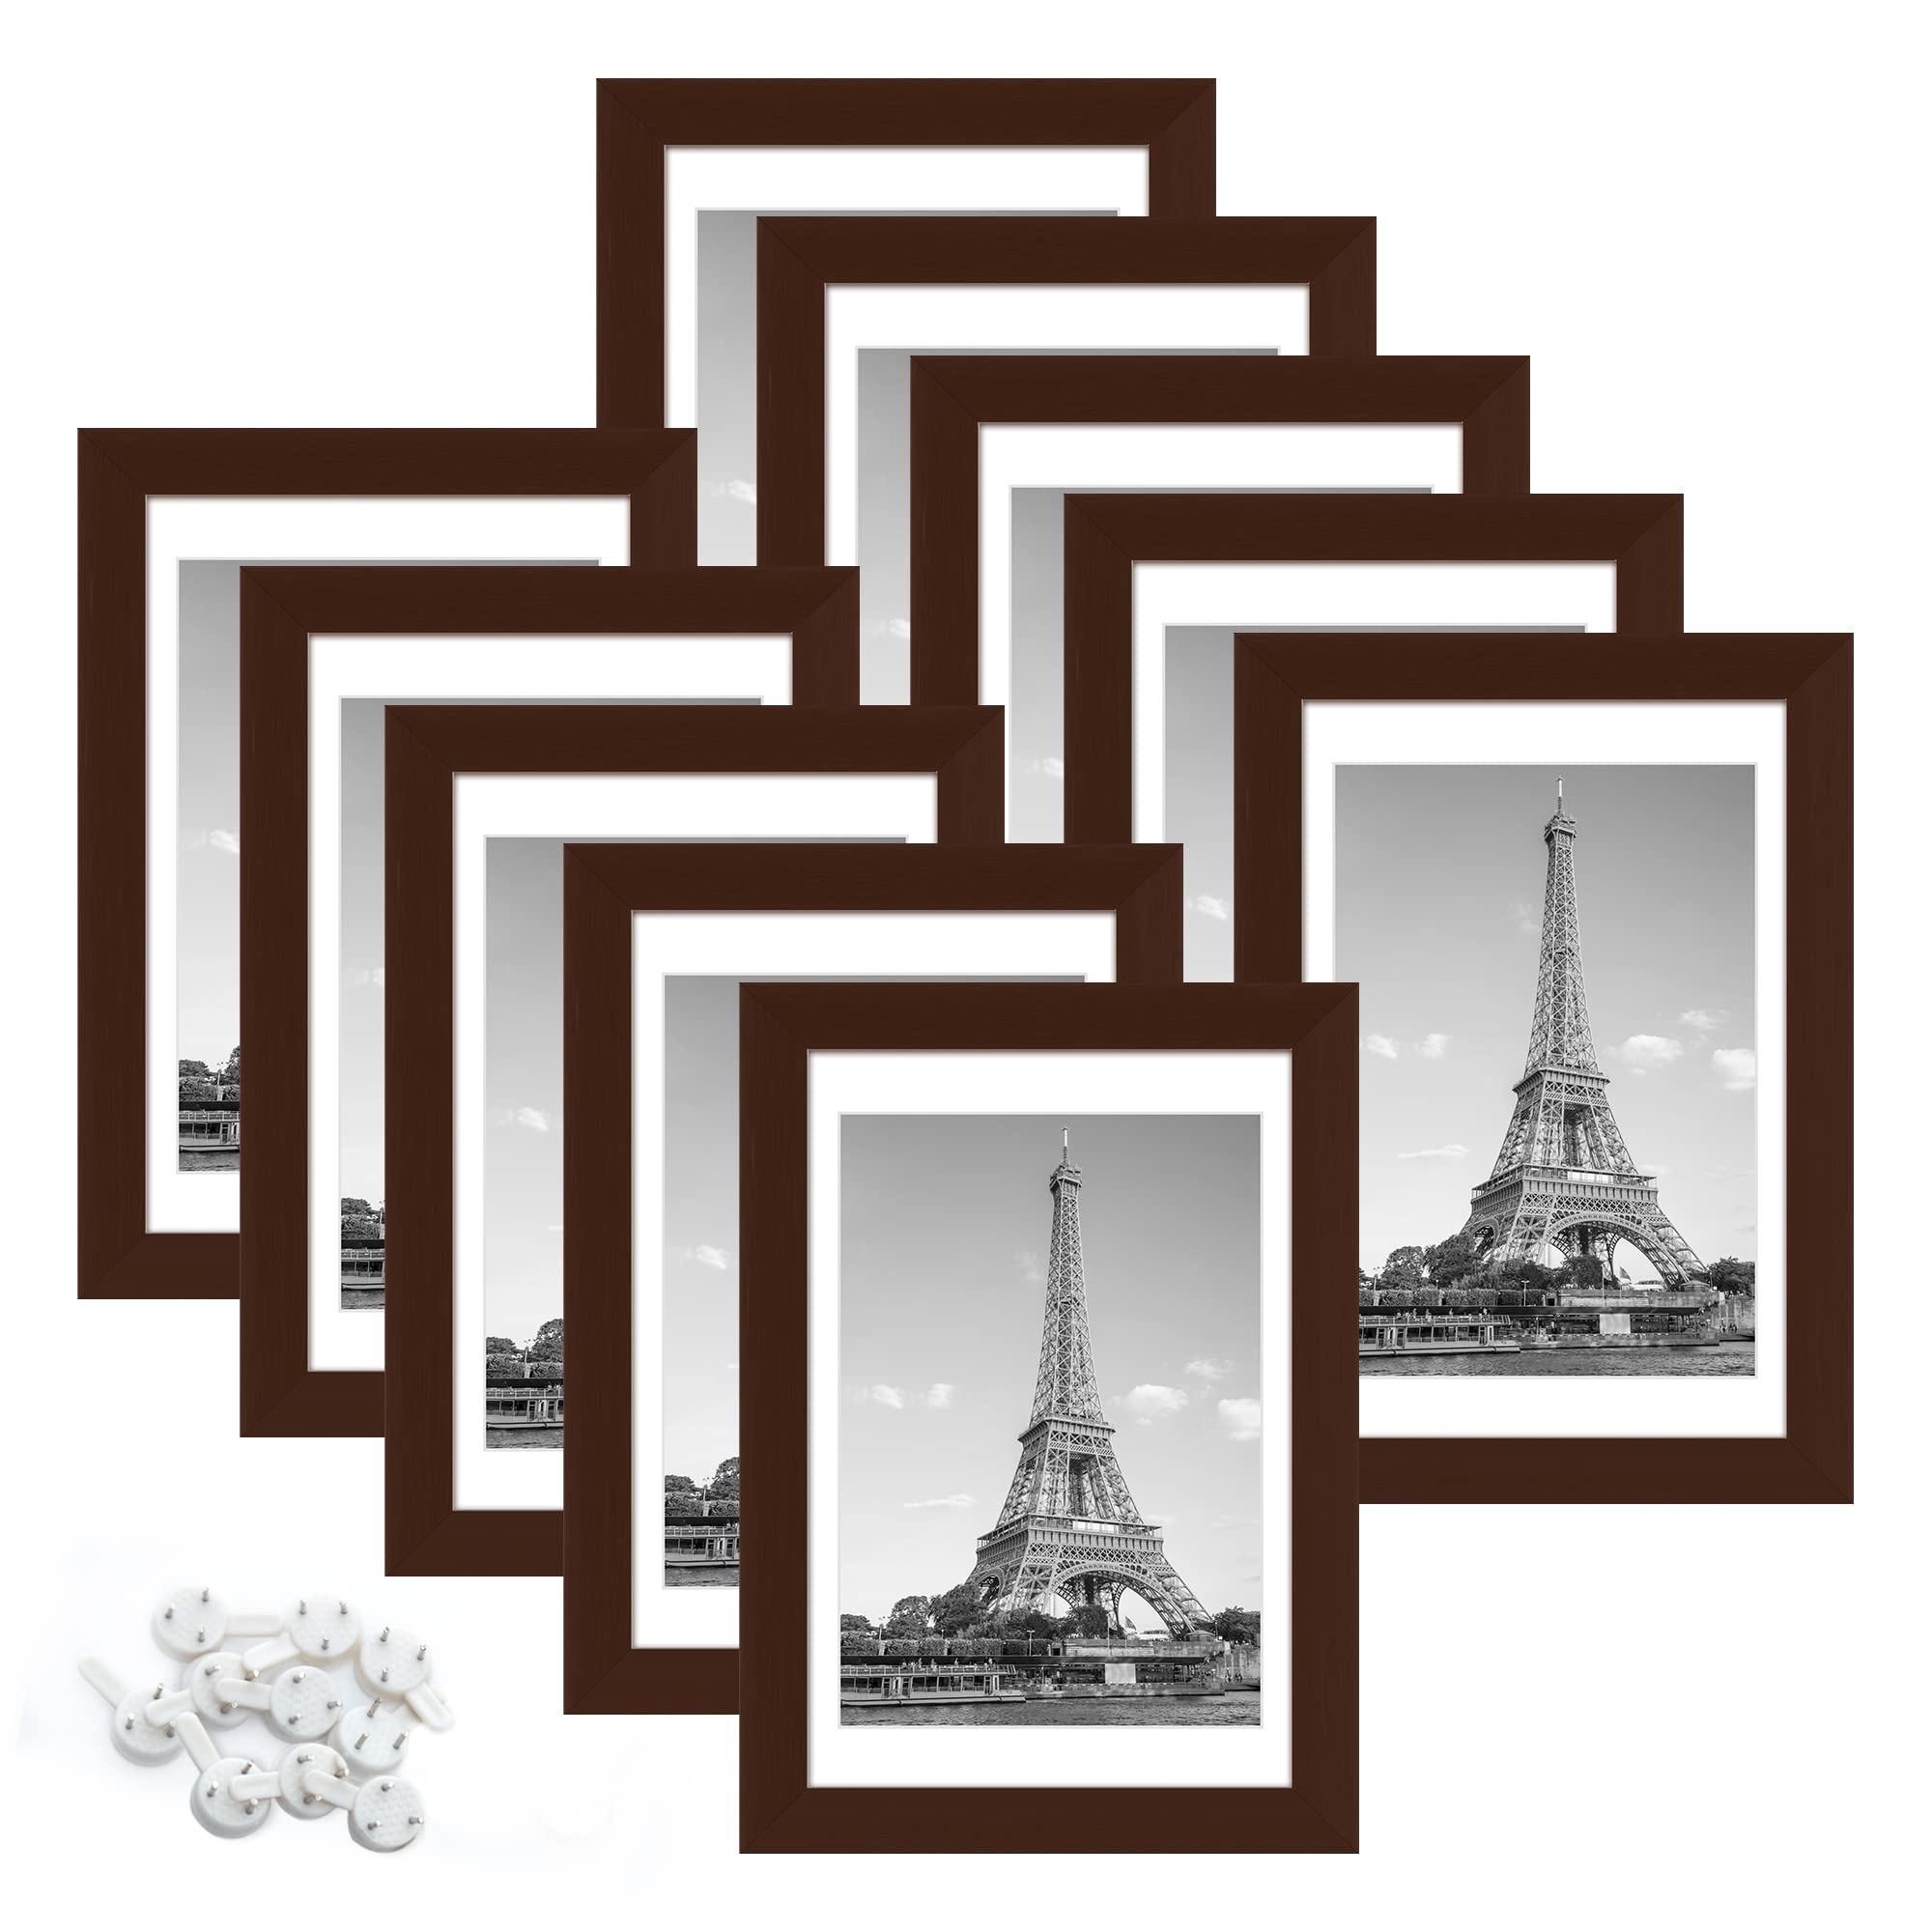 upsimples 4x6 Picture Frame Set of 3, Made of High Definition